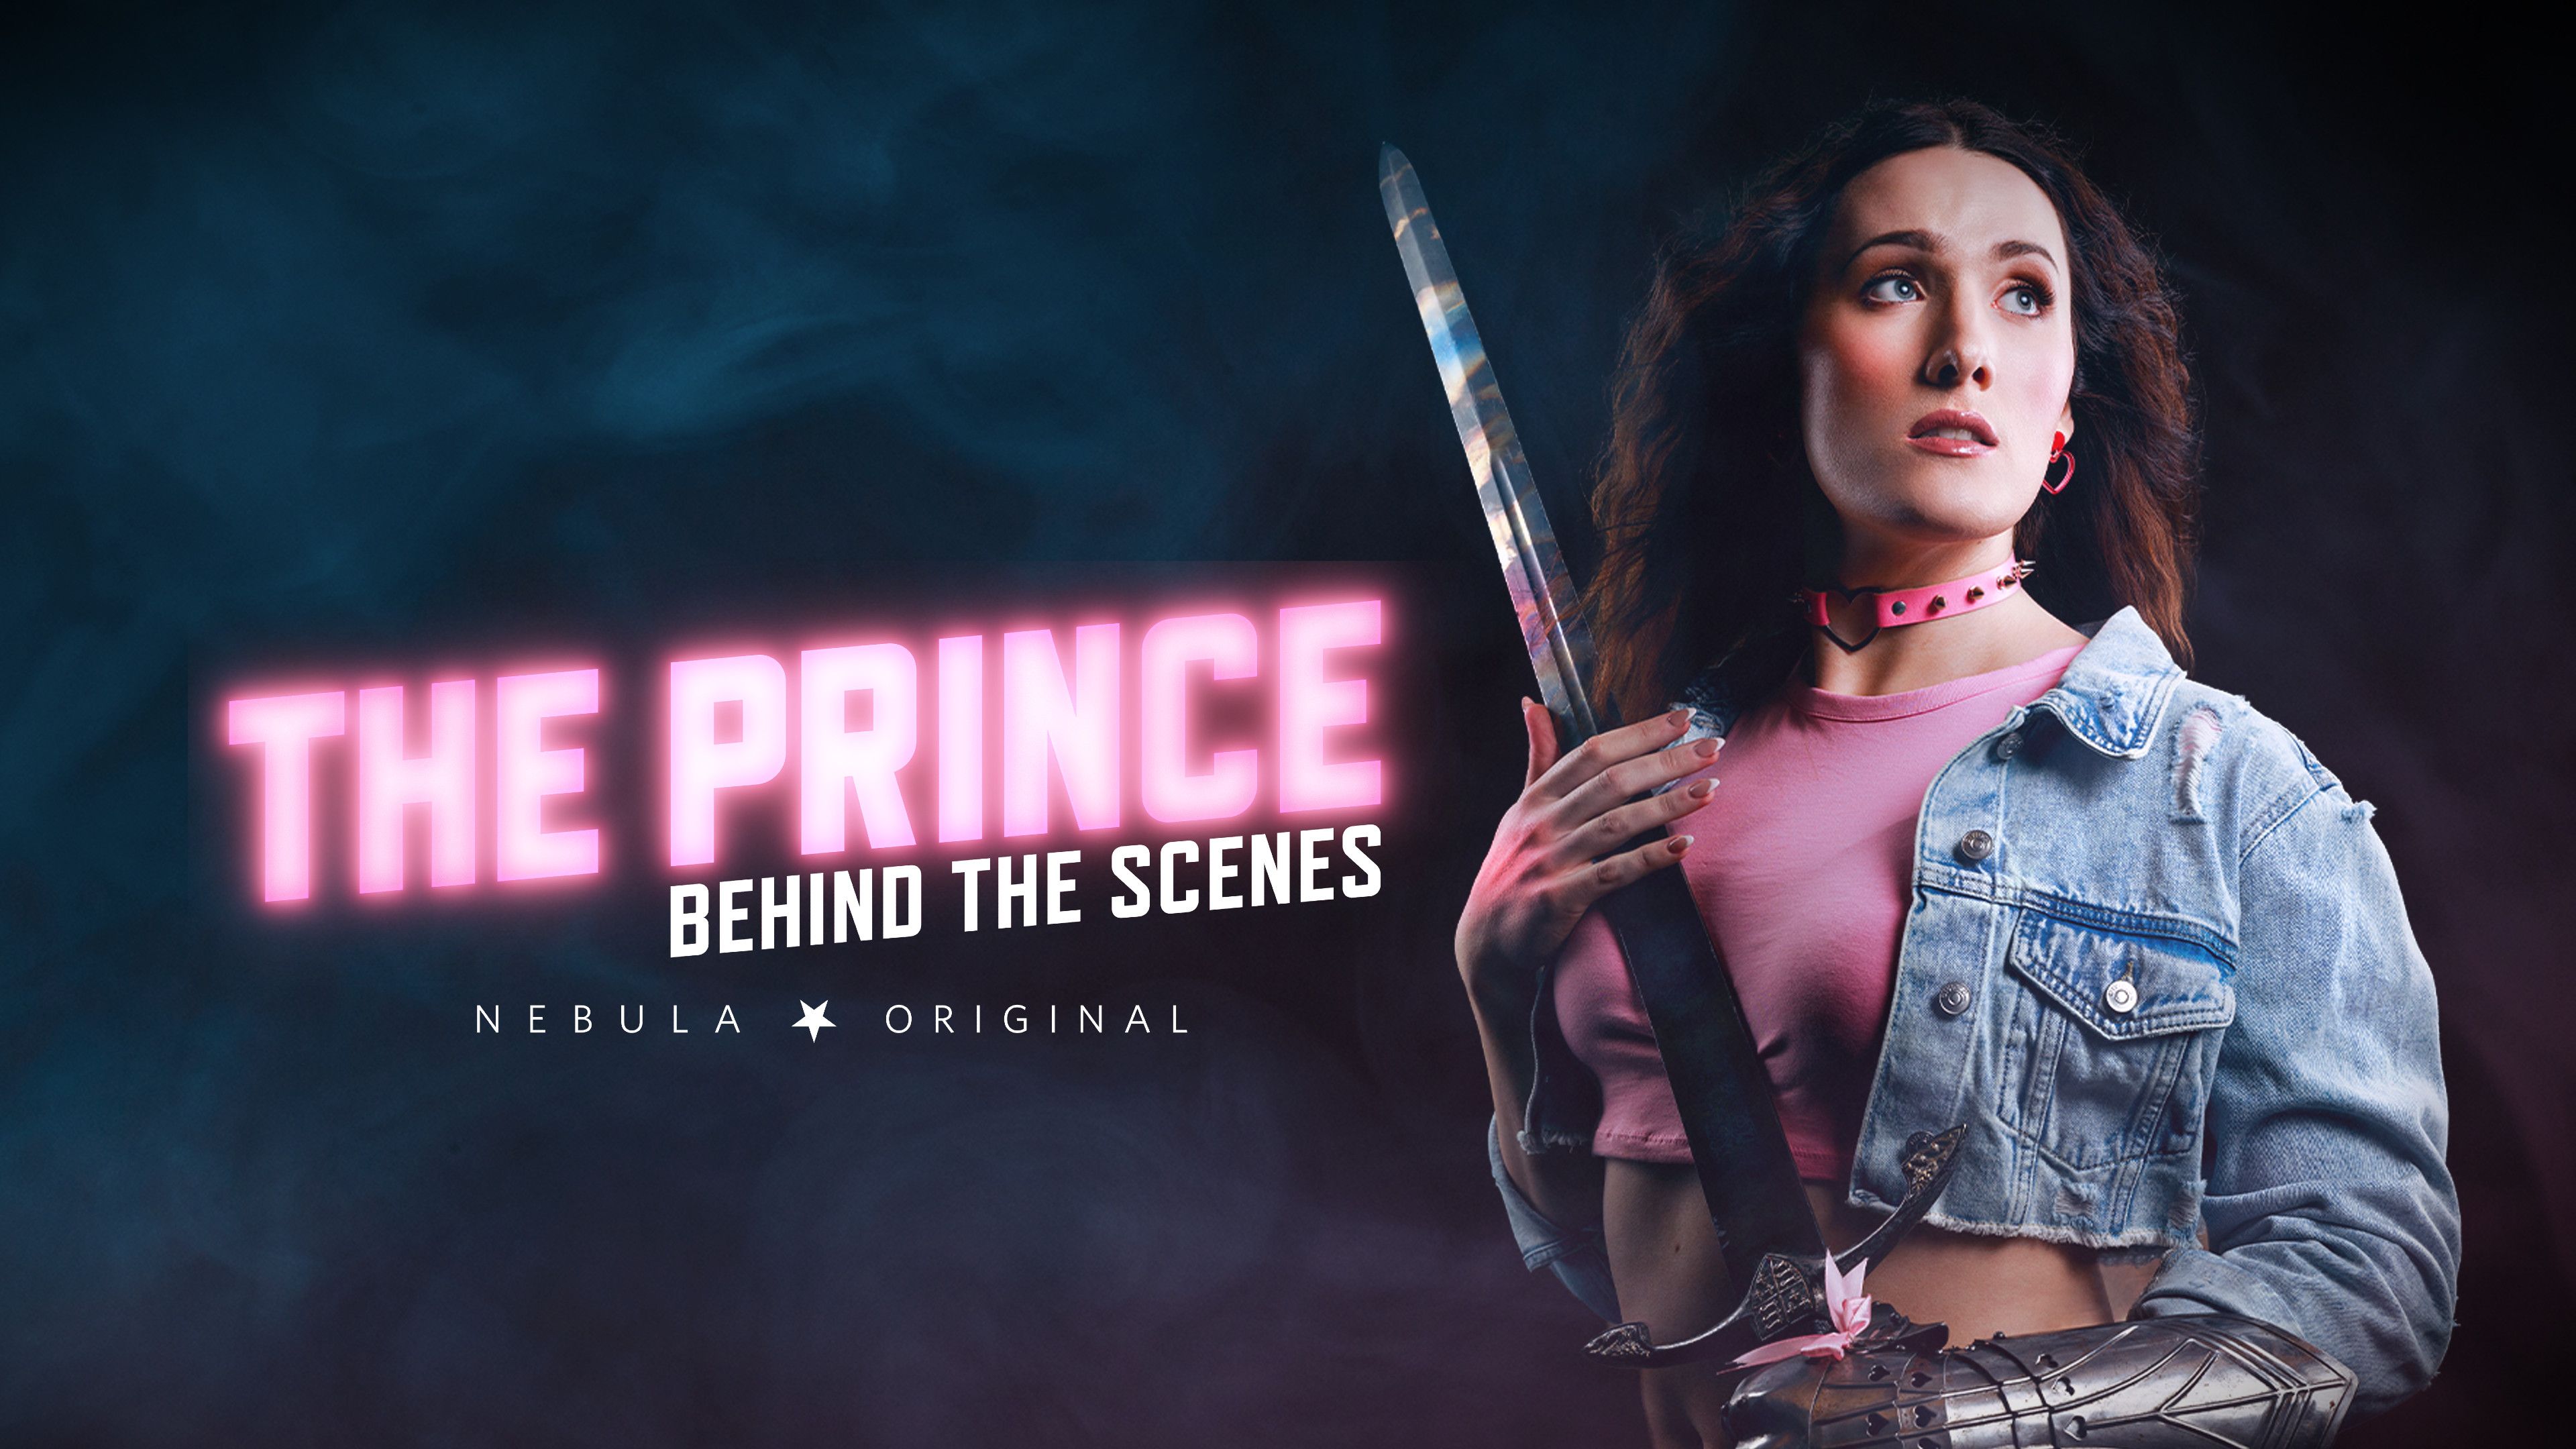 The Prince: Behind the Scenes